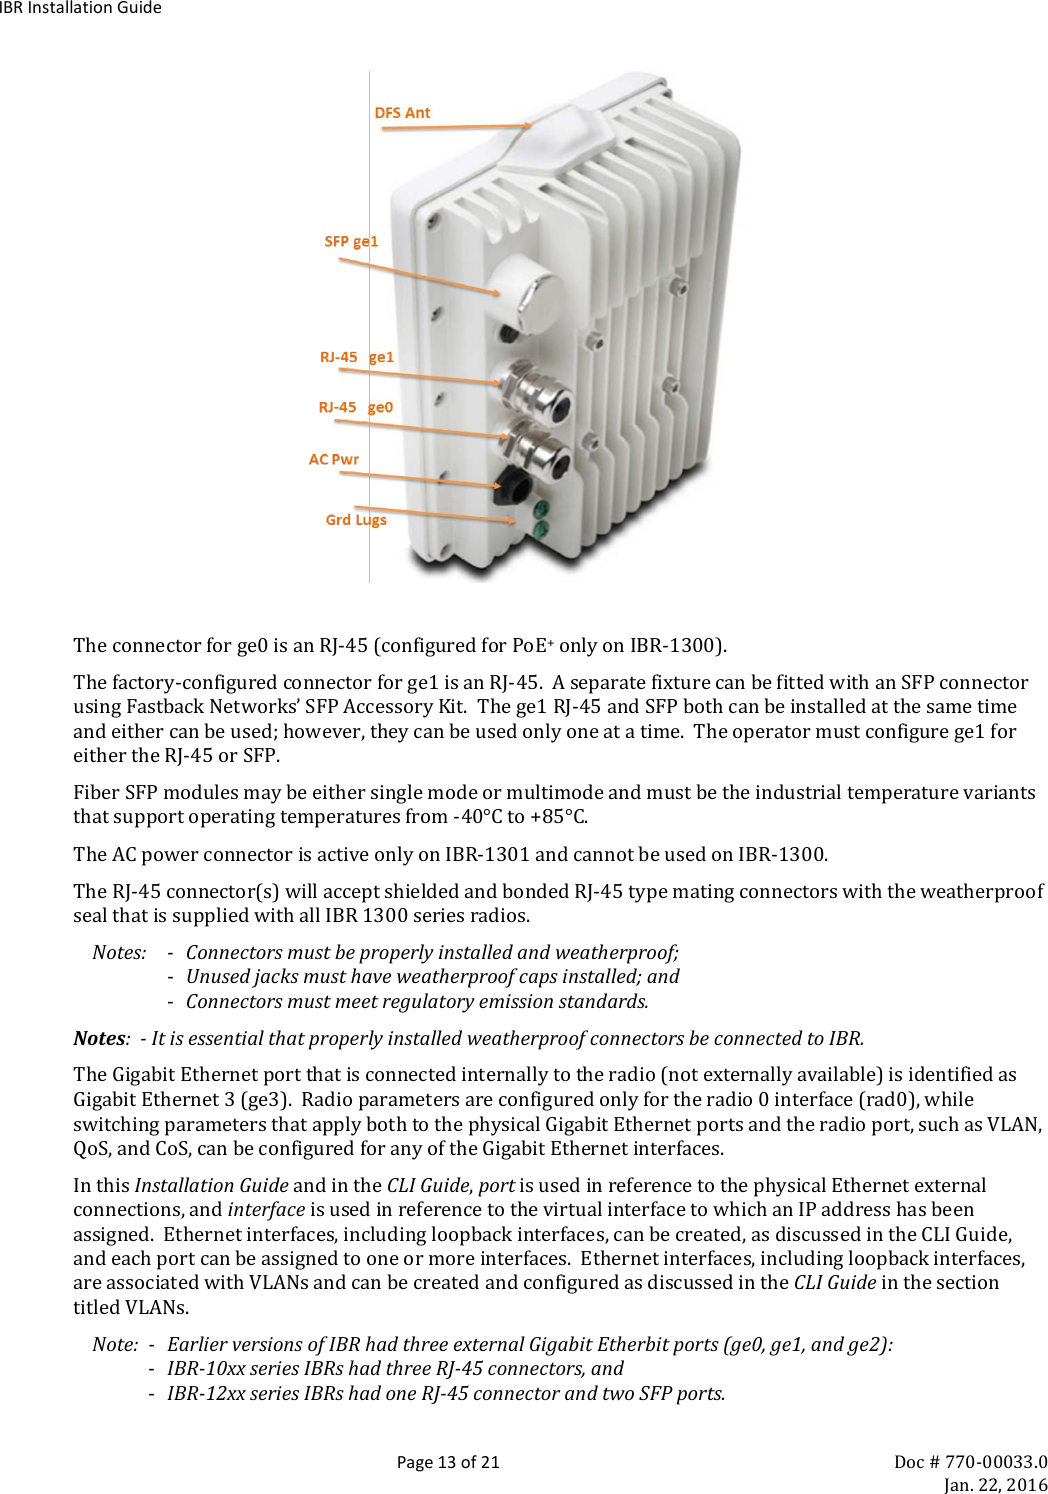 IBR Installation Guide  Page 13 of 21 Doc # 770-00033.0     Jan. 22, 2016   The connector for ge0 is an RJ-45 (configured for PoE+ only on IBR-1300). The factory-configured connector for ge1 is an RJ-45.  A separate fixture can be fitted with an SFP connector using Fastback Networks’ SFP Accessory Kit.  The ge1 RJ-45 and SFP both can be installed at the same time and either can be used; however, they can be used only one at a time.  The operator must configure ge1 for either the RJ-45 or SFP. Fiber SFP modules may be either single mode or multimode and must be the industrial temperature variants that support operating temperatures from -40°C to +85°C.   The AC power connector is active only on IBR-1301 and cannot be used on IBR-1300. The RJ-45 connector(s) will accept shielded and bonded RJ-45 type mating connectors with the weatherproof seal that is supplied with all IBR 1300 series radios.   Notes:  -  Connectors must be properly installed and weatherproof; - Unused jacks must have weatherproof caps installed; and - Connectors must meet regulatory emission standards. Notes:  - It is essential that properly installed weatherproof connectors be connected to IBR. The Gigabit Ethernet port that is connected internally to the radio (not externally available) is identified as Gigabit Ethernet 3 (ge3).  Radio parameters are configured only for the radio 0 interface (rad0), while switching parameters that apply both to the physical Gigabit Ethernet ports and the radio port, such as VLAN, QoS, and CoS, can be configured for any of the Gigabit Ethernet interfaces. In this Installation Guide and in the CLI Guide, port is used in reference to the physical Ethernet external connections, and interface is used in reference to the virtual interface to which an IP address has been assigned.  Ethernet interfaces, including loopback interfaces, can be created, as discussed in the CLI Guide, and each port can be assigned to one or more interfaces.  Ethernet interfaces, including loopback interfaces, are associated with VLANs and can be created and configured as discussed in the CLI Guide in the section titled VLANs.  Note:  -  Earlier versions of IBR had three external Gigabit Etherbit ports (ge0, ge1, and ge2): - IBR-10xx series IBRs had three RJ-45 connectors, and - IBR-12xx series IBRs had one RJ-45 connector and two SFP ports. 